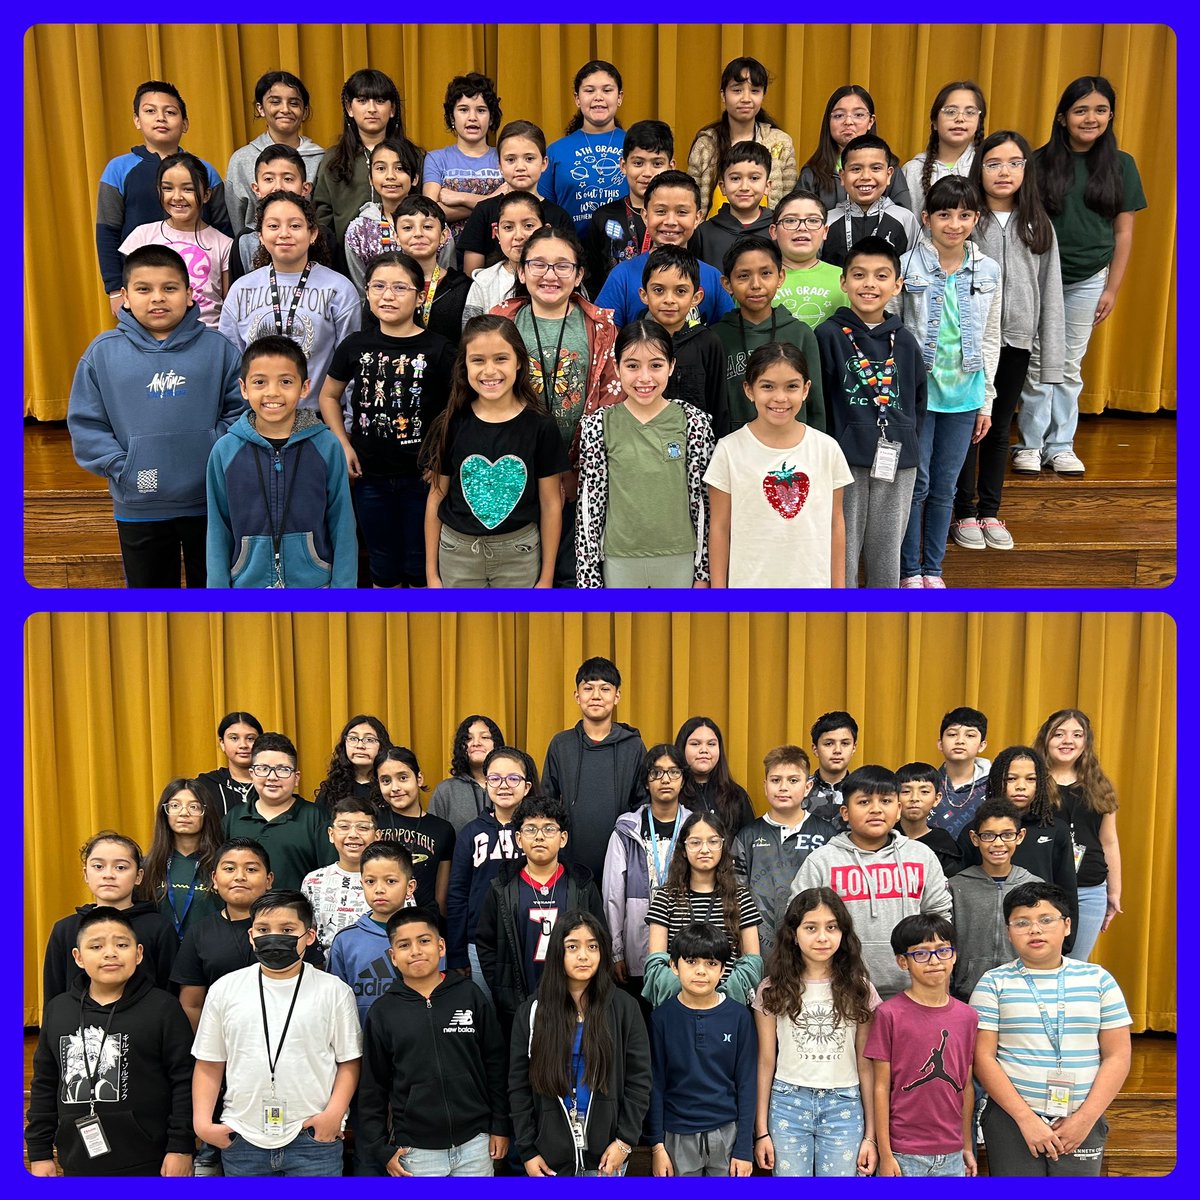 Rain or Shine …these scholars come to school! Here are the students that had perfect attendance and no tardies for the month of April. @Arcos1968 @BenjaminVoss_ @maty_orozco @drgoffney